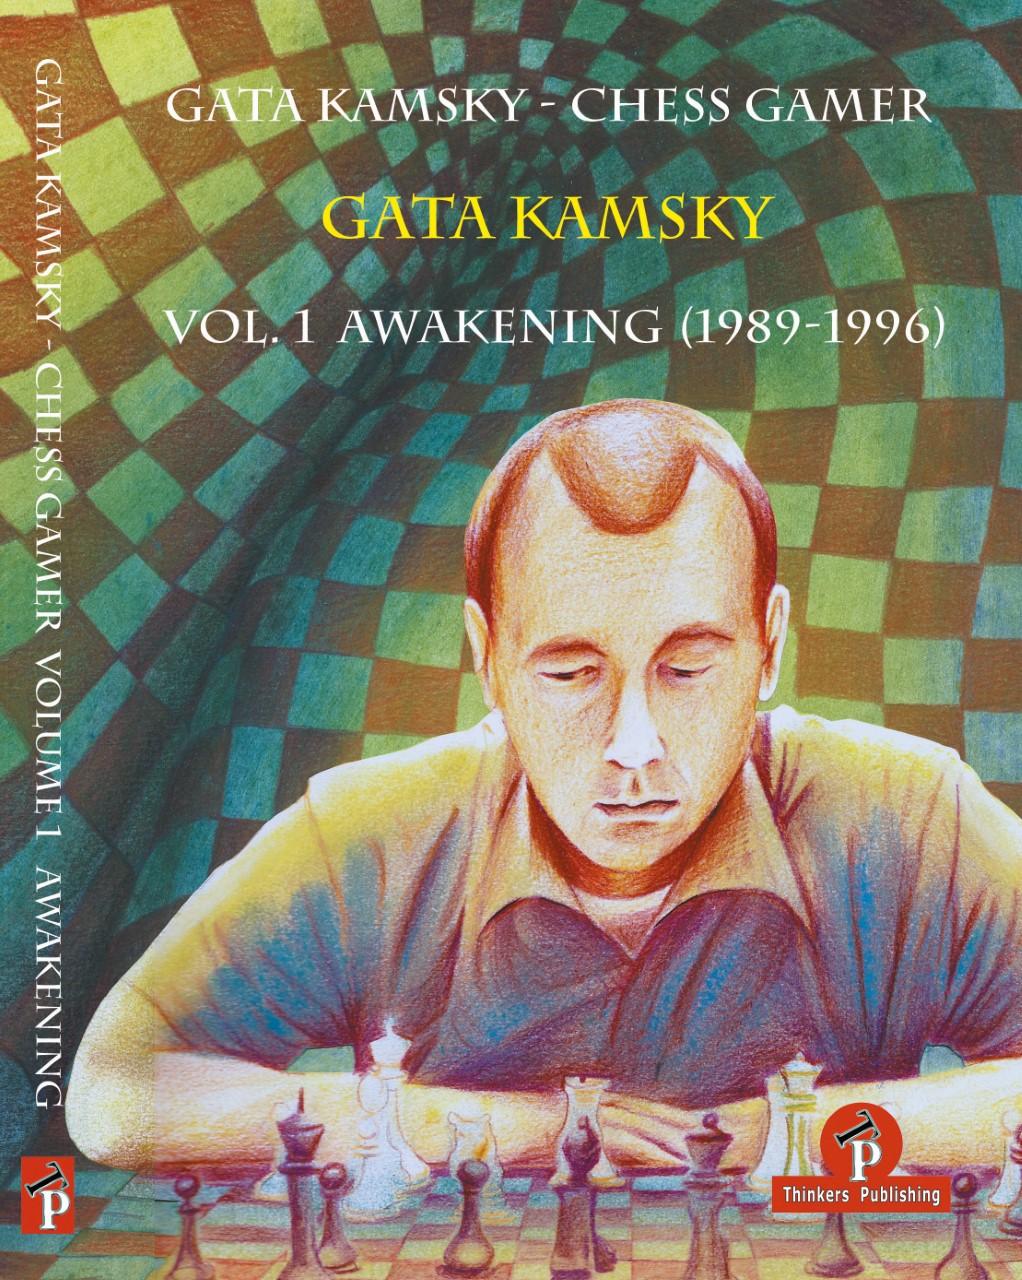 My Best Games - Chess Lessons from My Legacy, Volume 1: 1989-1996: Chess Lessons from My Legacy, Volume 1: 1989-1996 - Kamsky, Gata